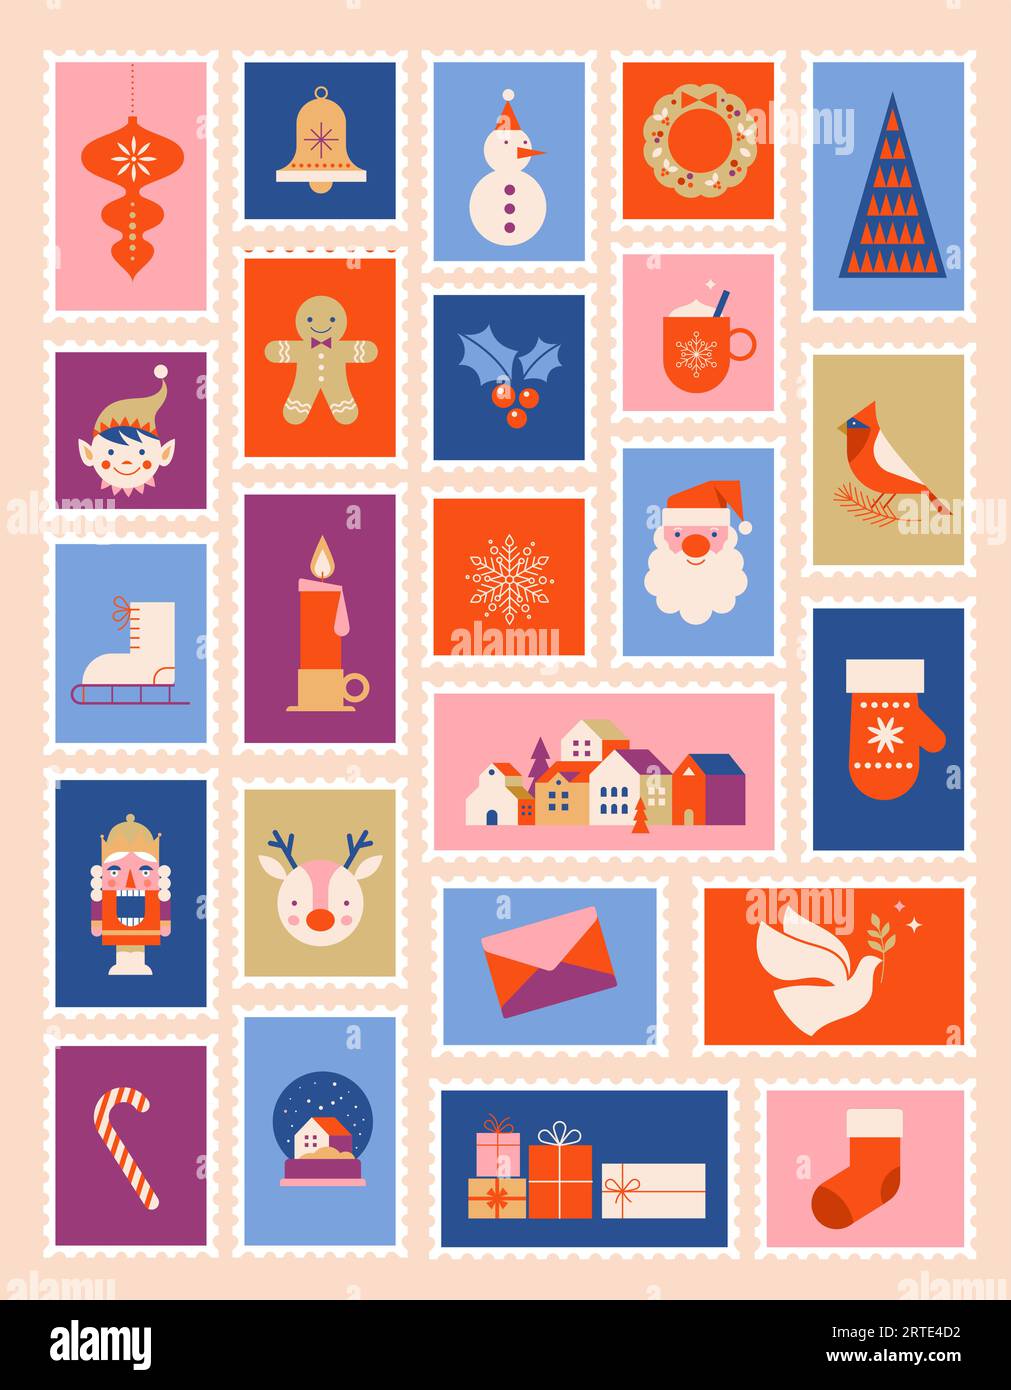 for The Love of Stamps - Advent Calendar Elements